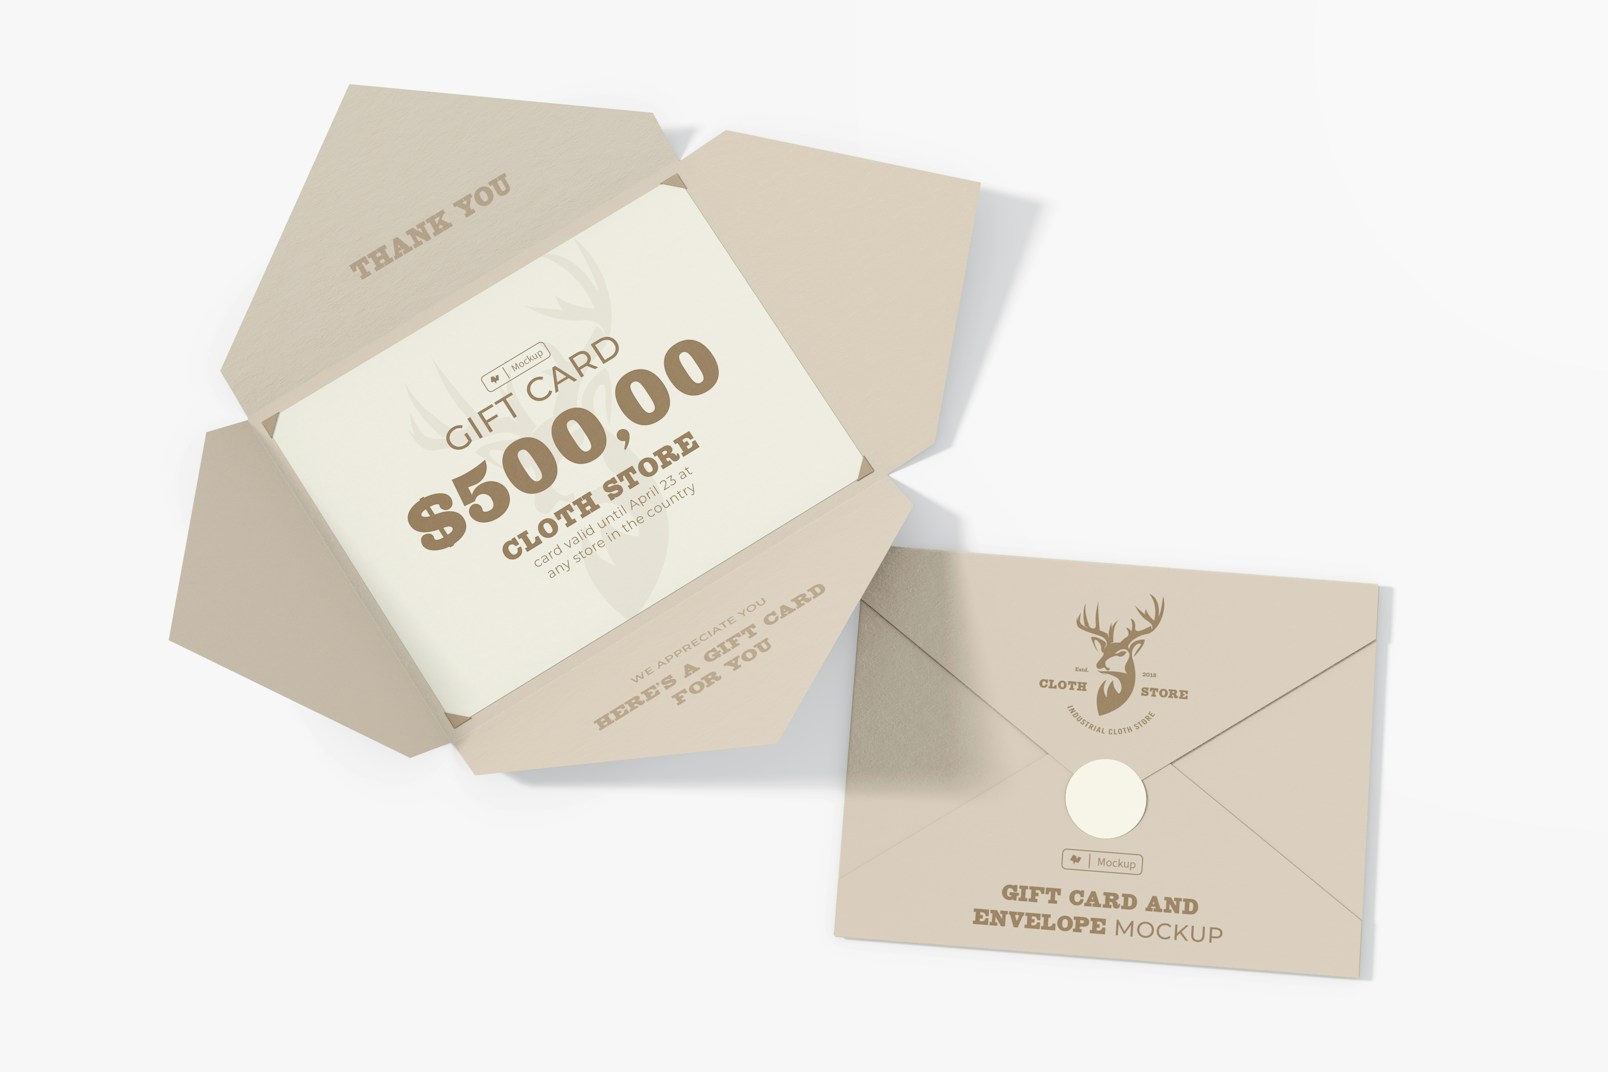 Gift Card with Envelopes Mockup, Opened and Closed